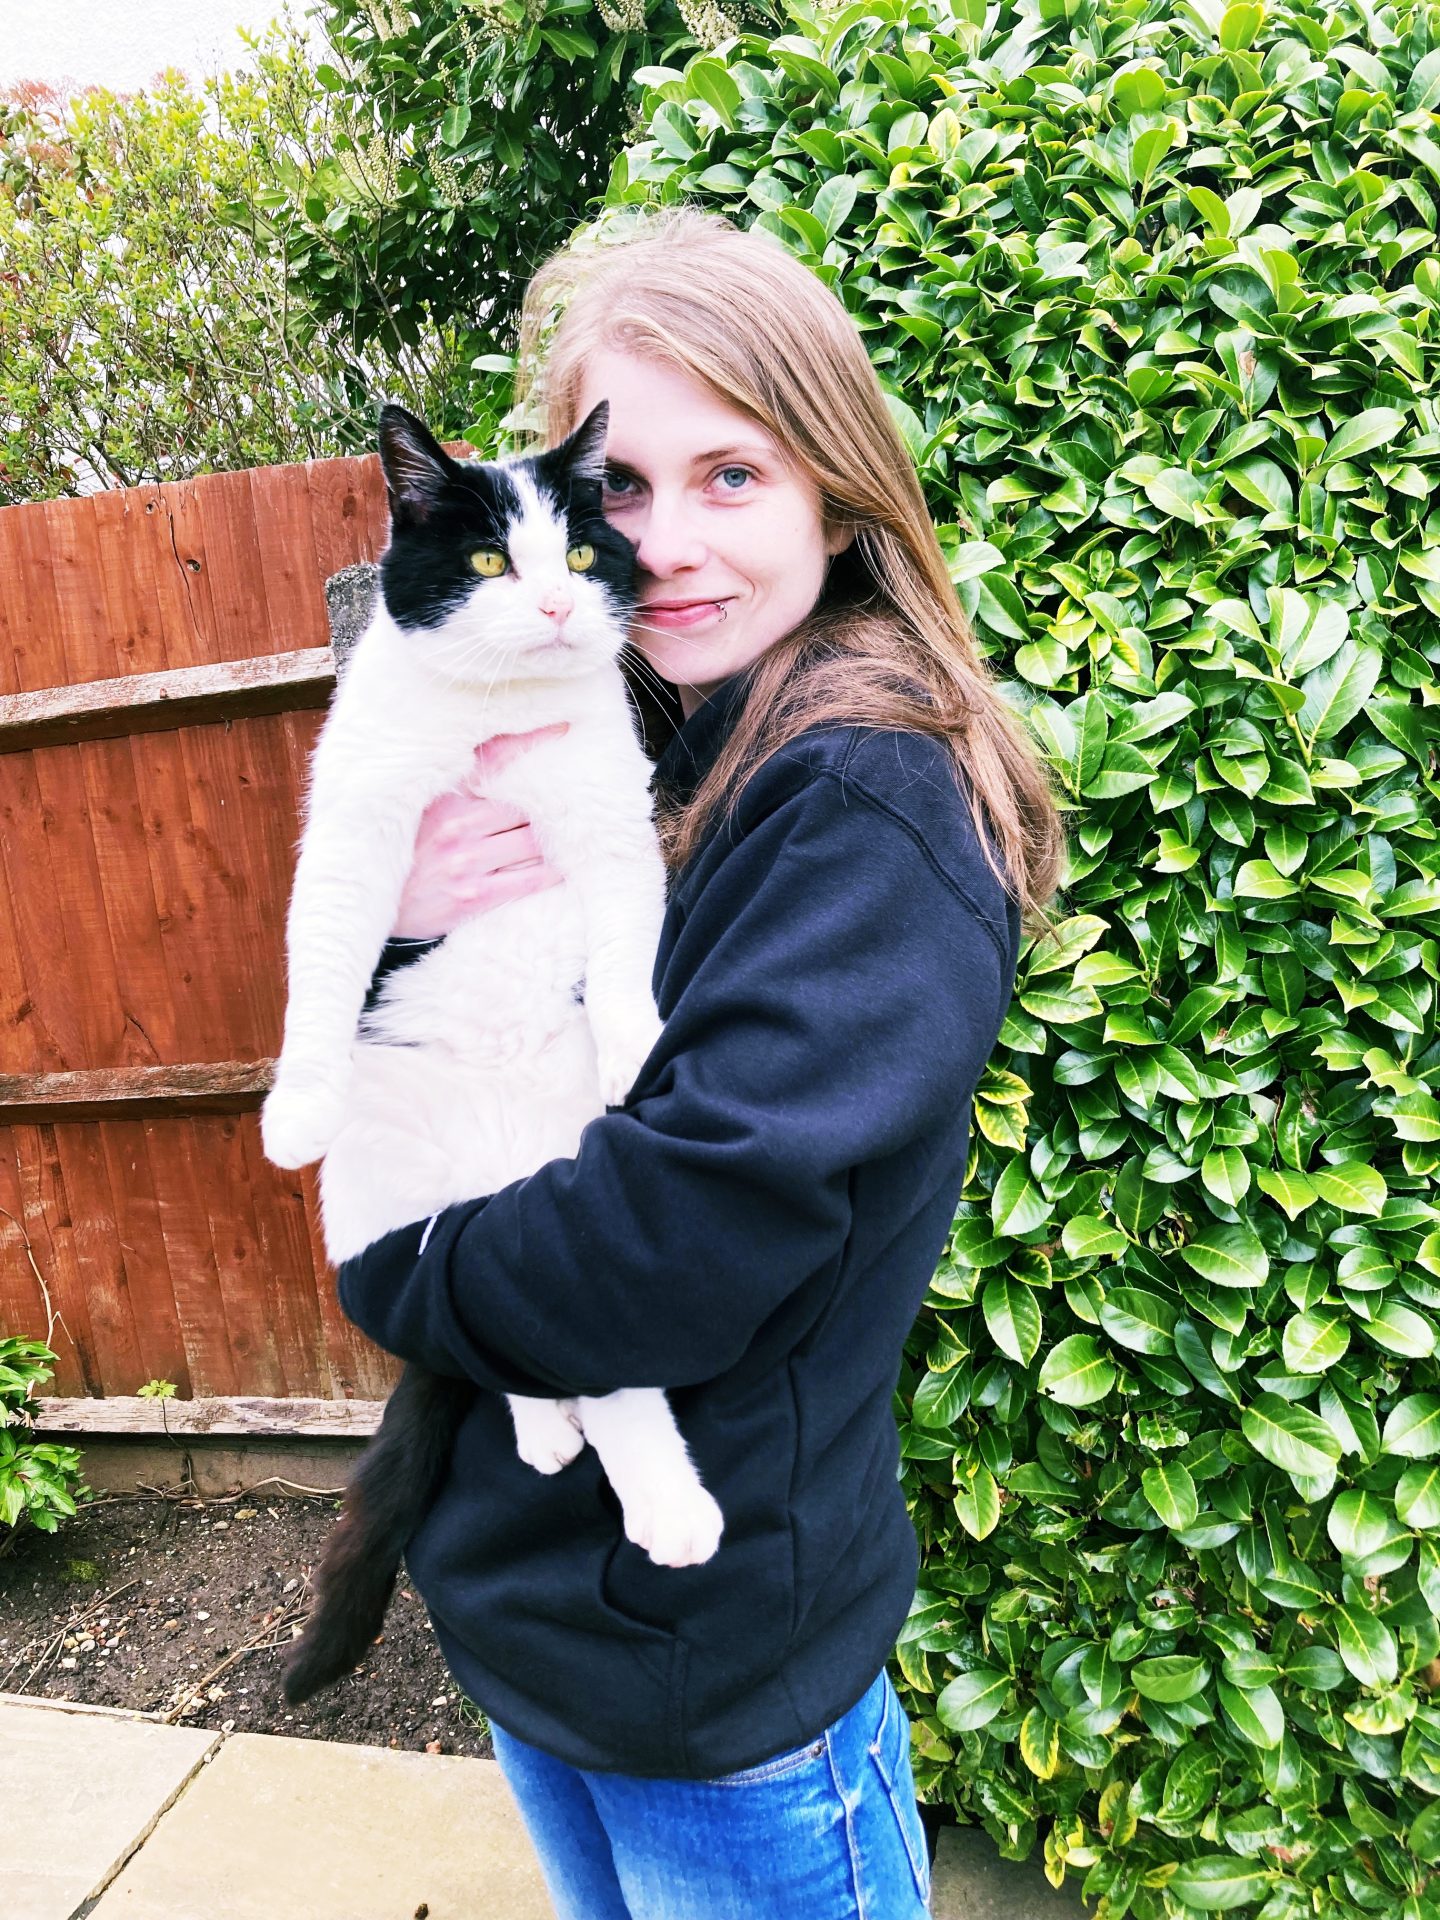 A photo of me in the garden wearing jeans and a black hoodie, holding up and hugging my black and white cat Virgil to my face.